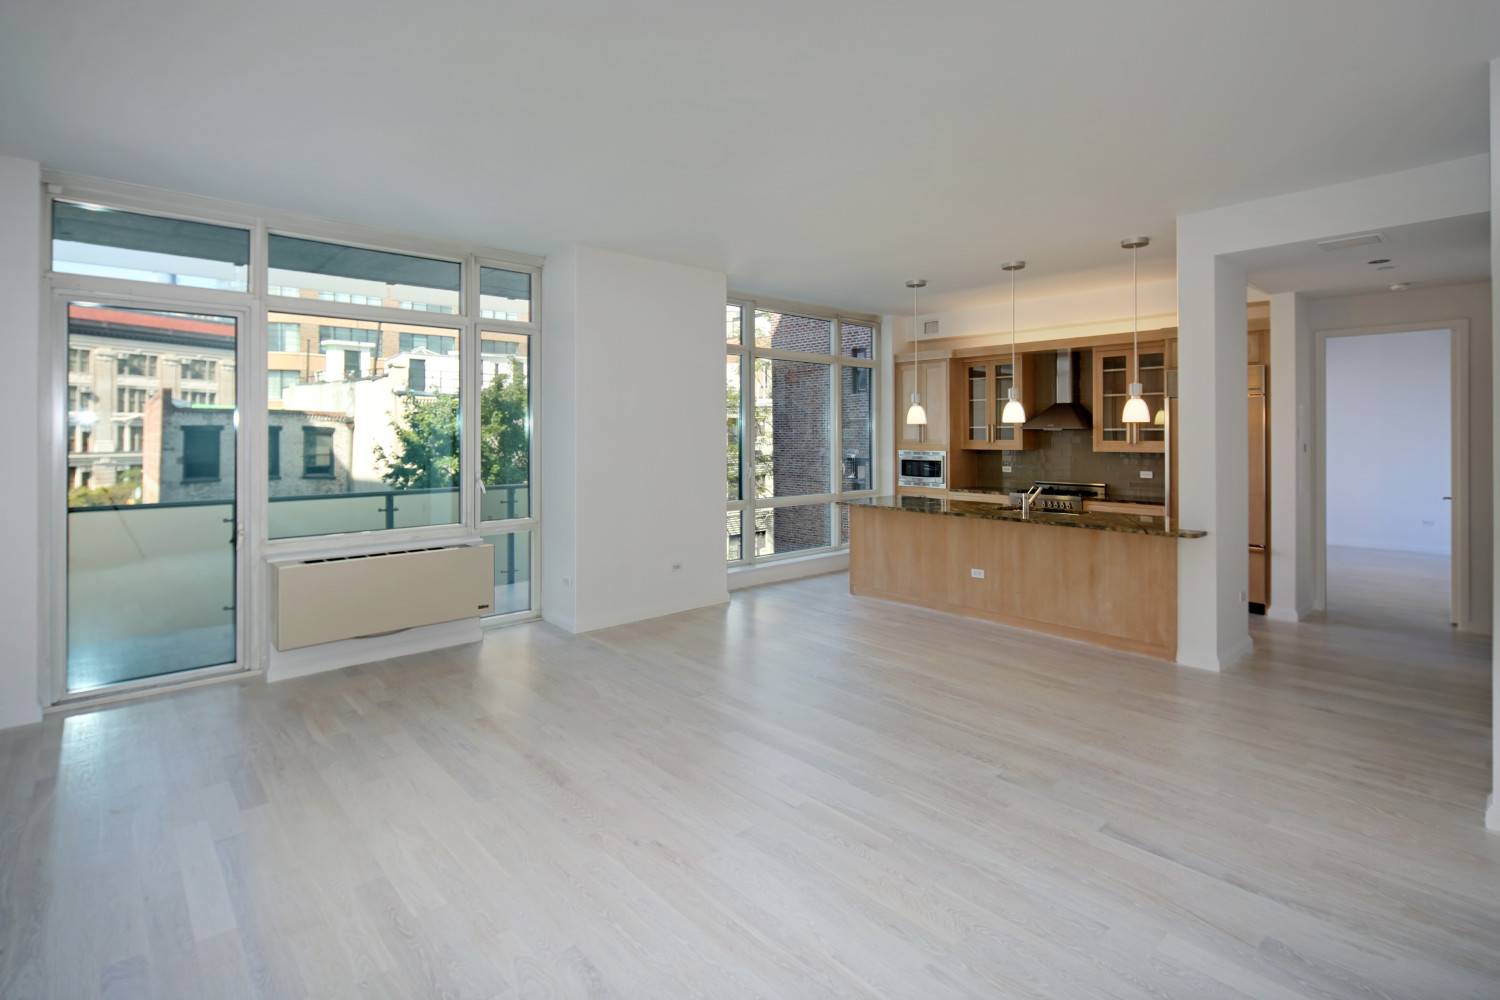 No Fee, 1 Bed/1.5 Bath SoHo Apartment in Luxury Building, W/D in unit